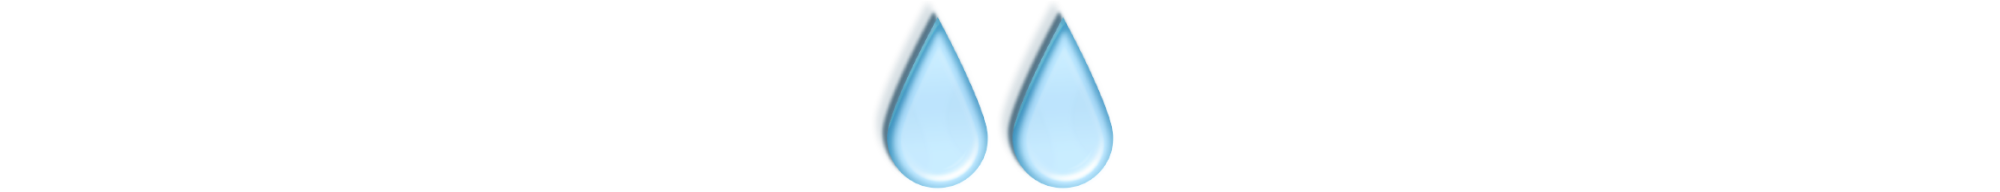 Two realistic illustrated water drops